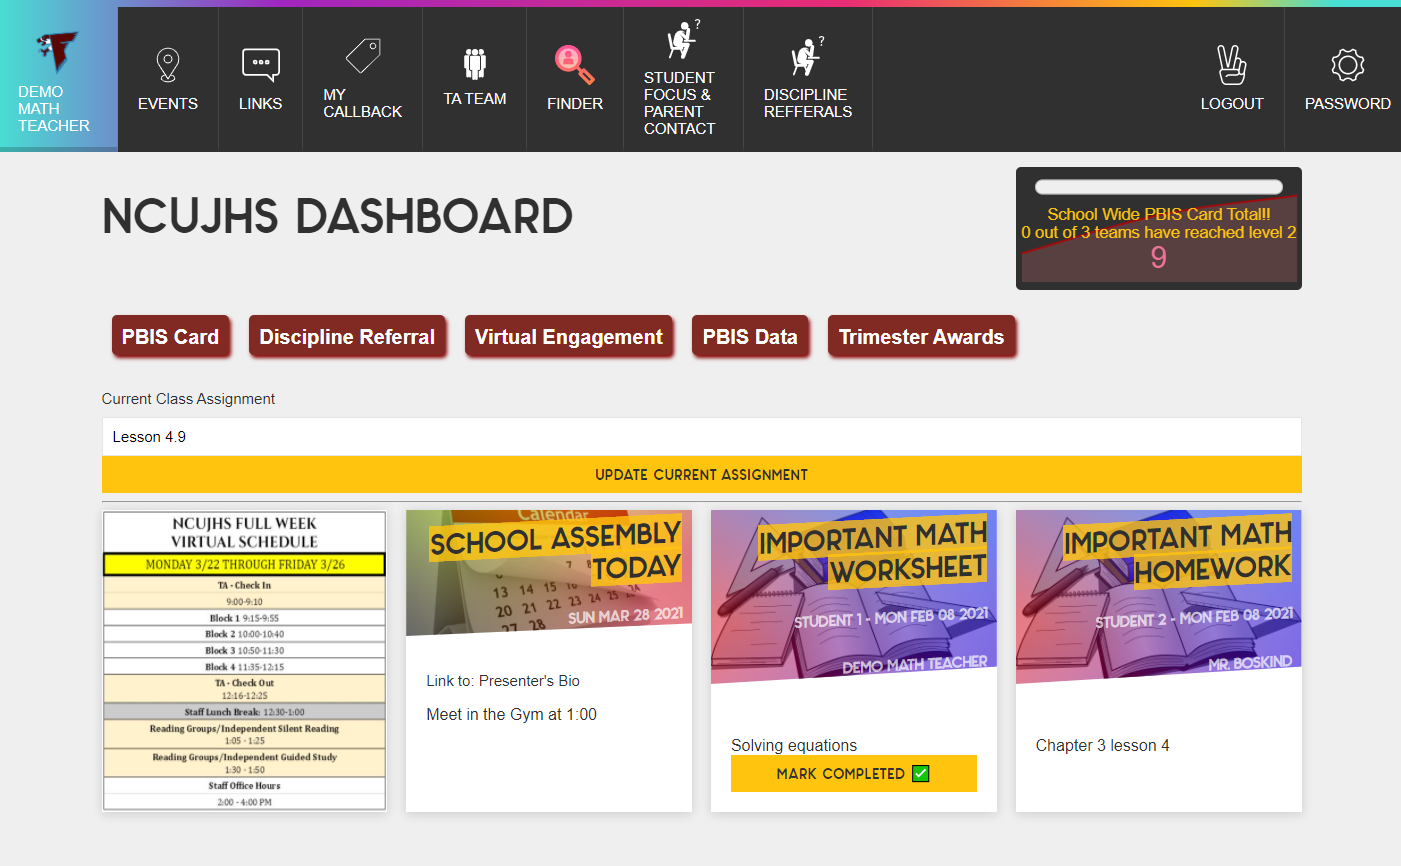 A guided tour of the NCUJHS.Tech School Dashboard.  This is the initial version that was used for 2 years.  It was replaced by a new version in 2021.